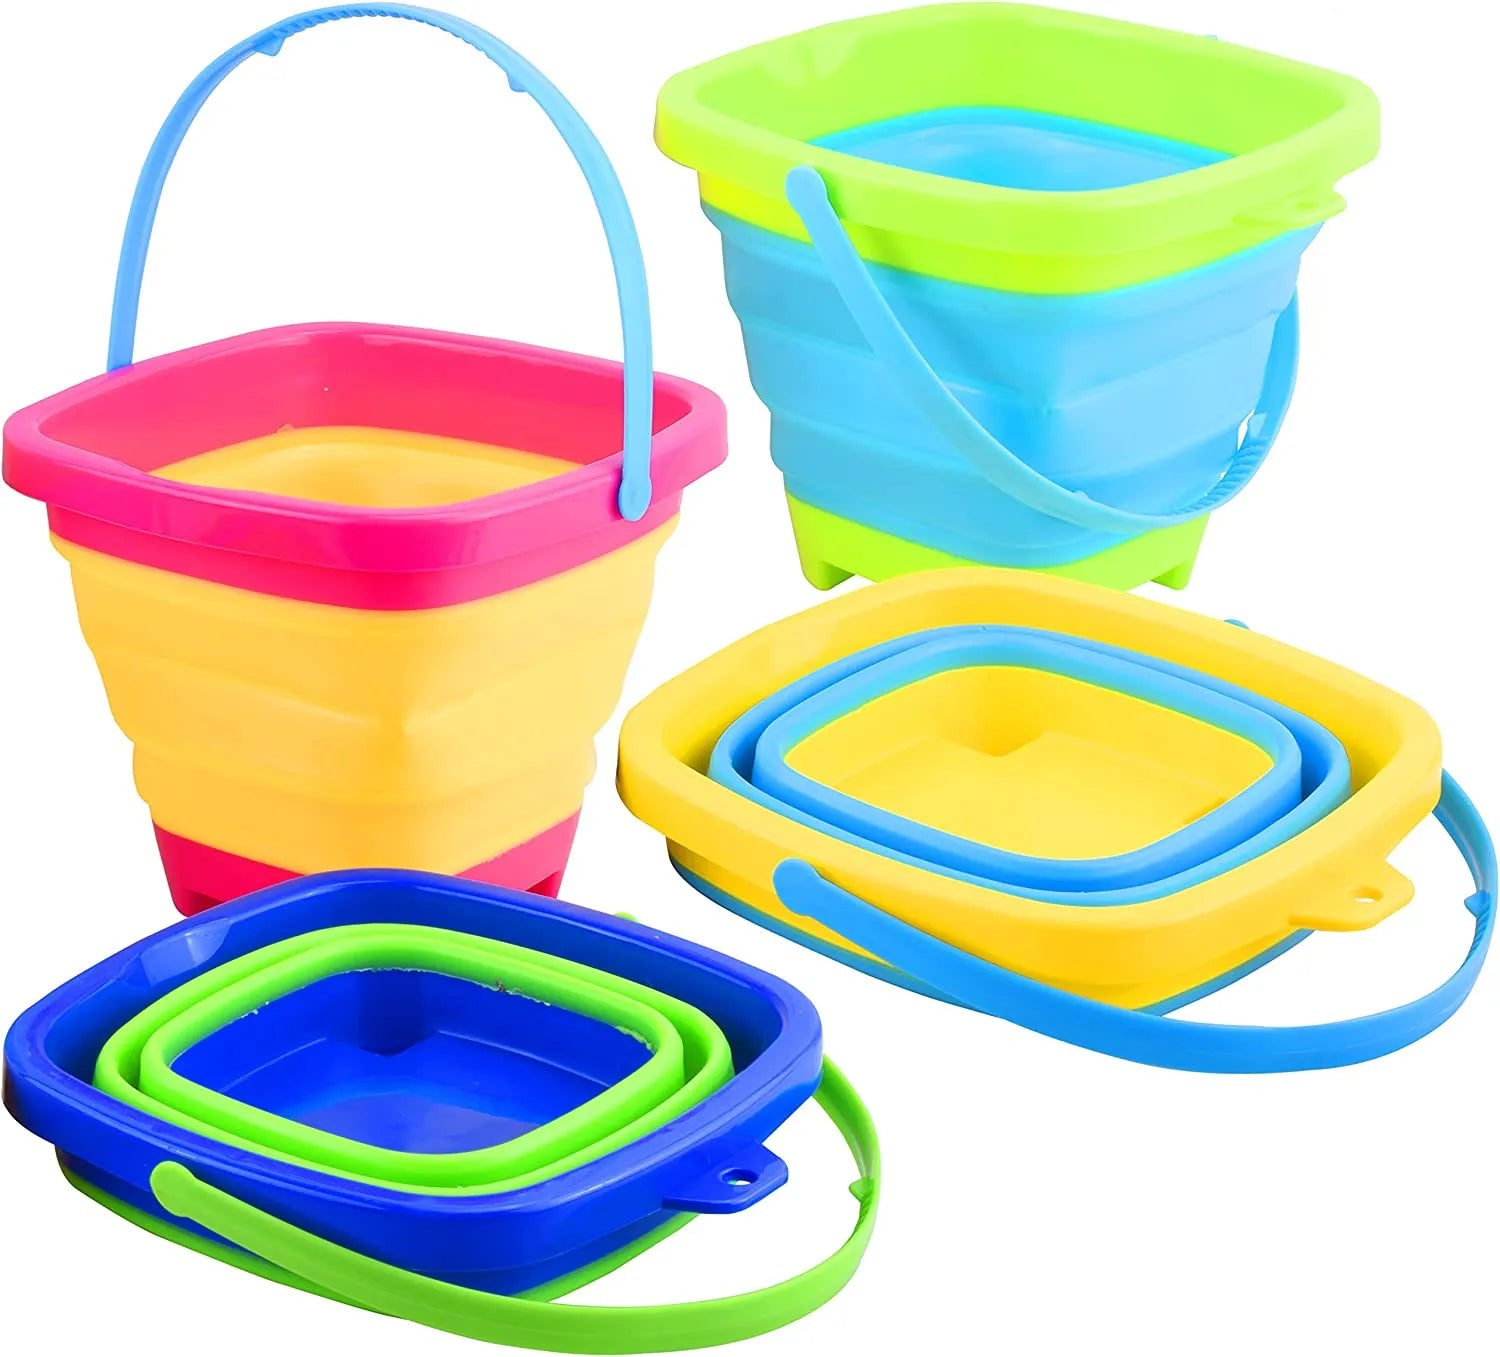 JOYIN 4 Collapsible Buckets & Basket for Kid, 2L Foldable Round Tub Portable